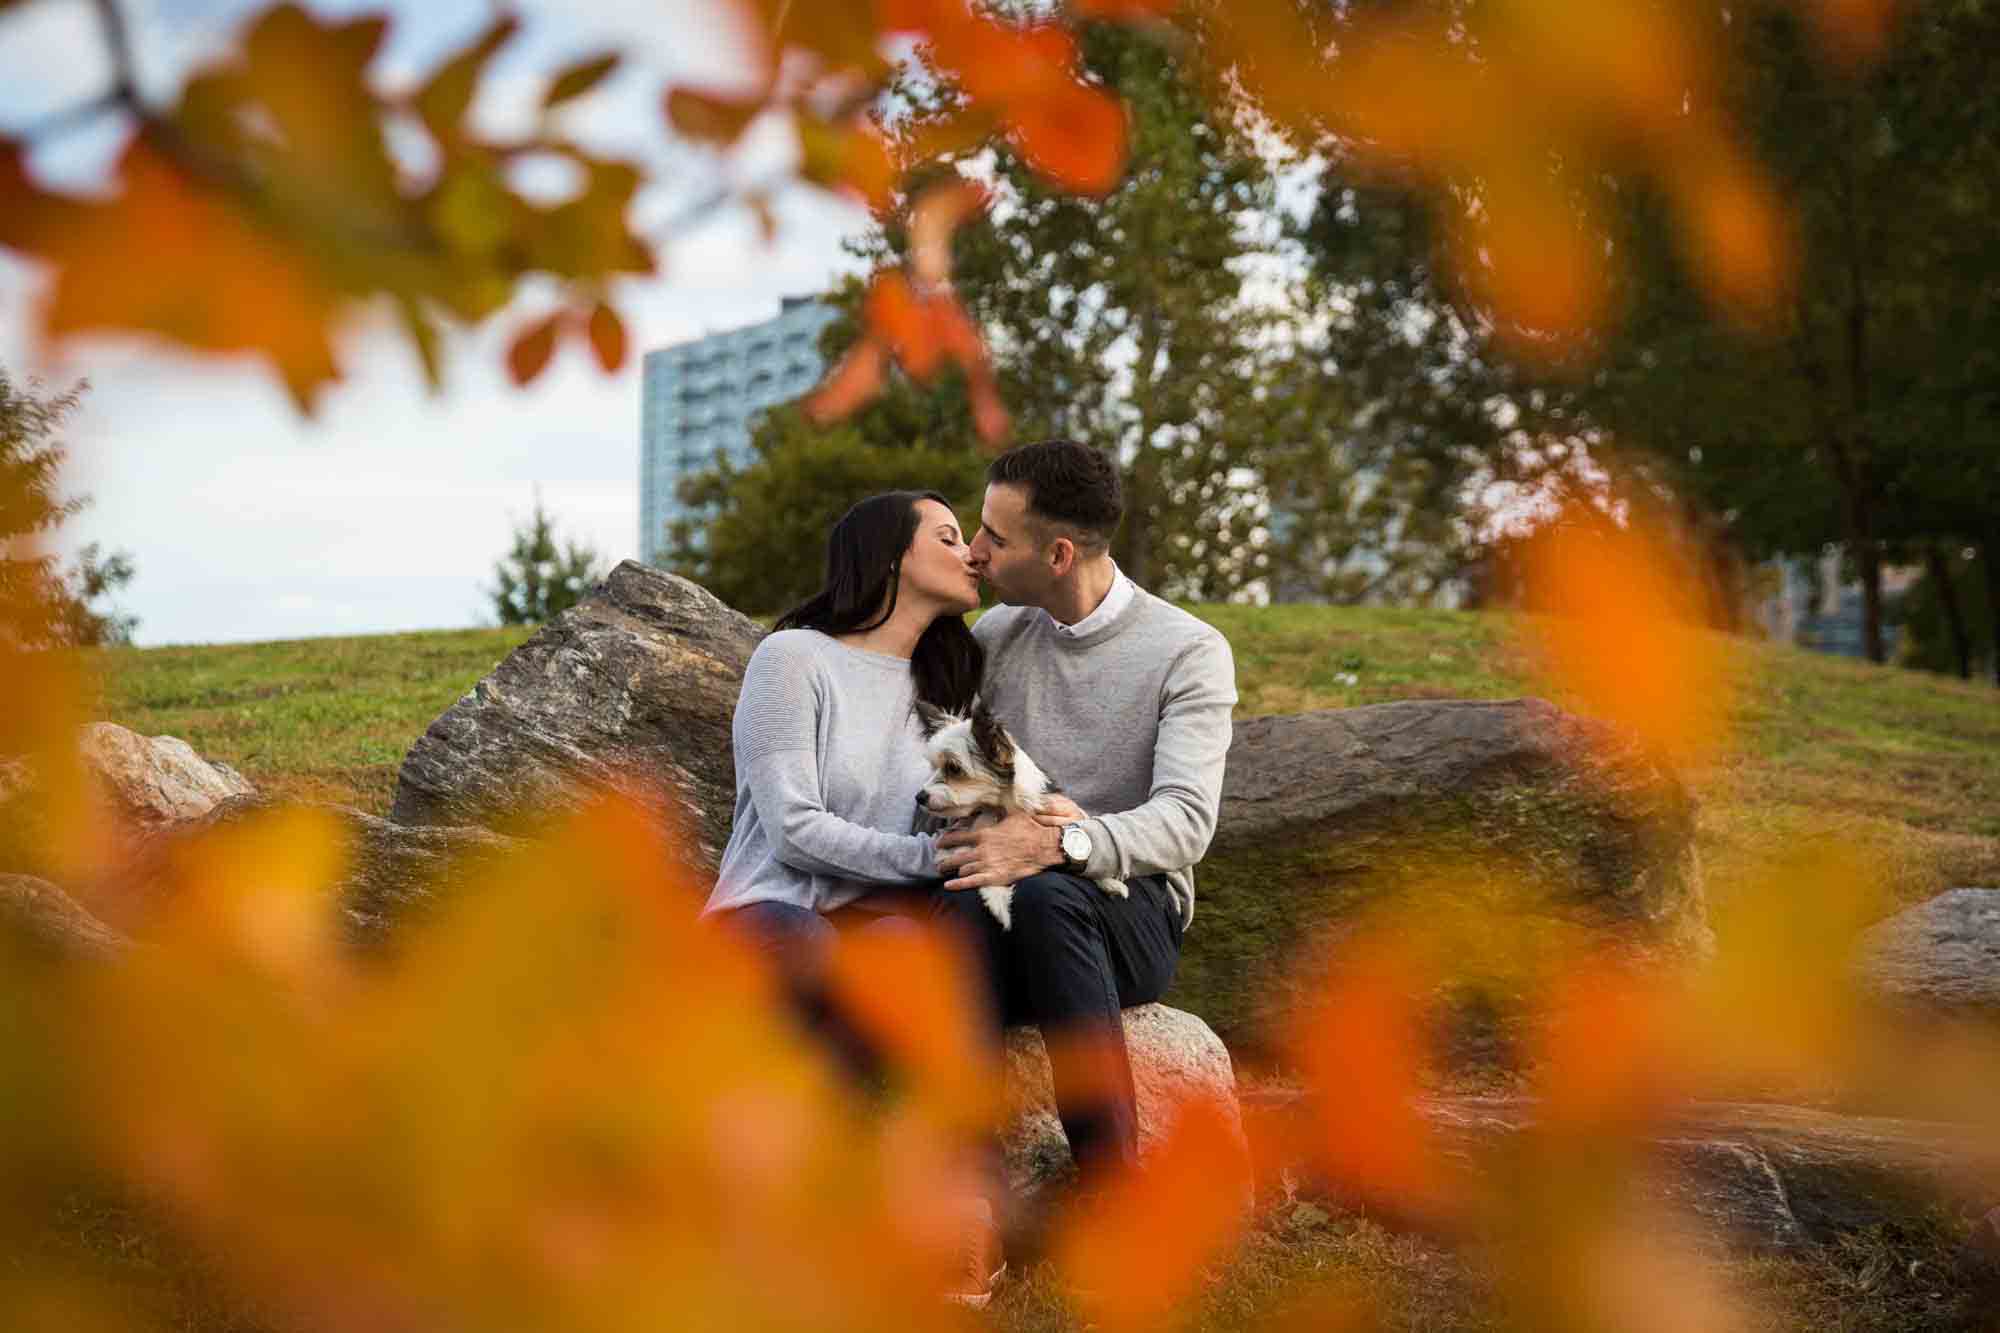 View through orange leaves of couple kissing while holding dog for an article on pet engagement photo tips